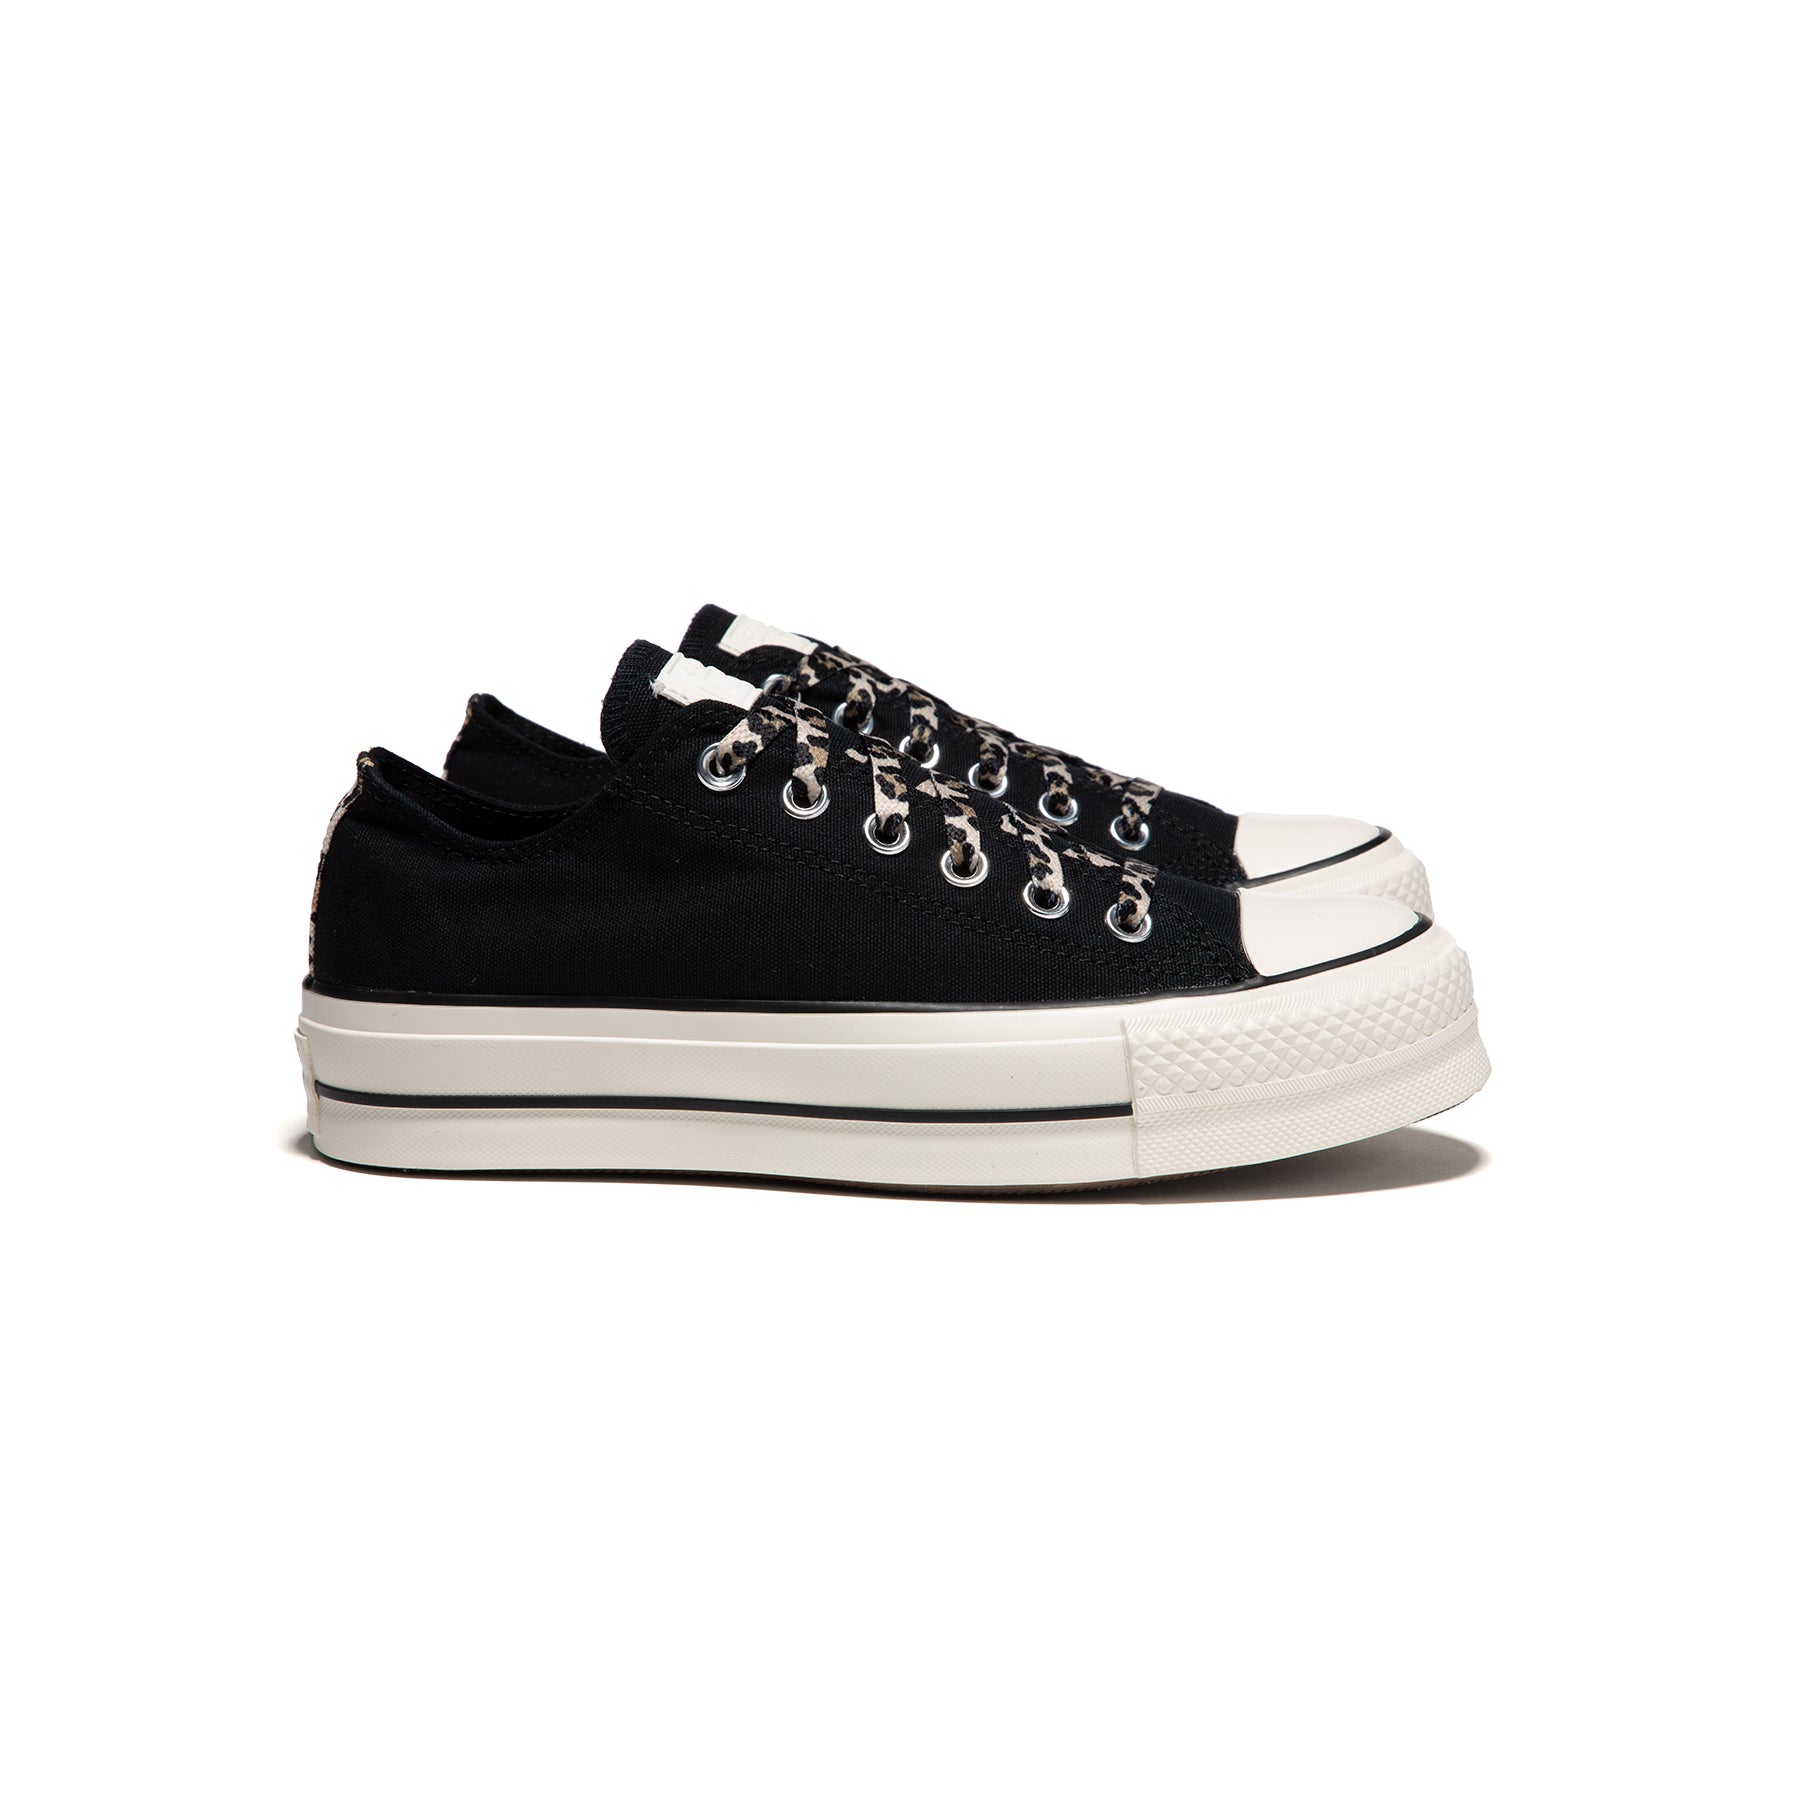 Converse Womens Taylor All Star Lift OX (Black/Light Concepts